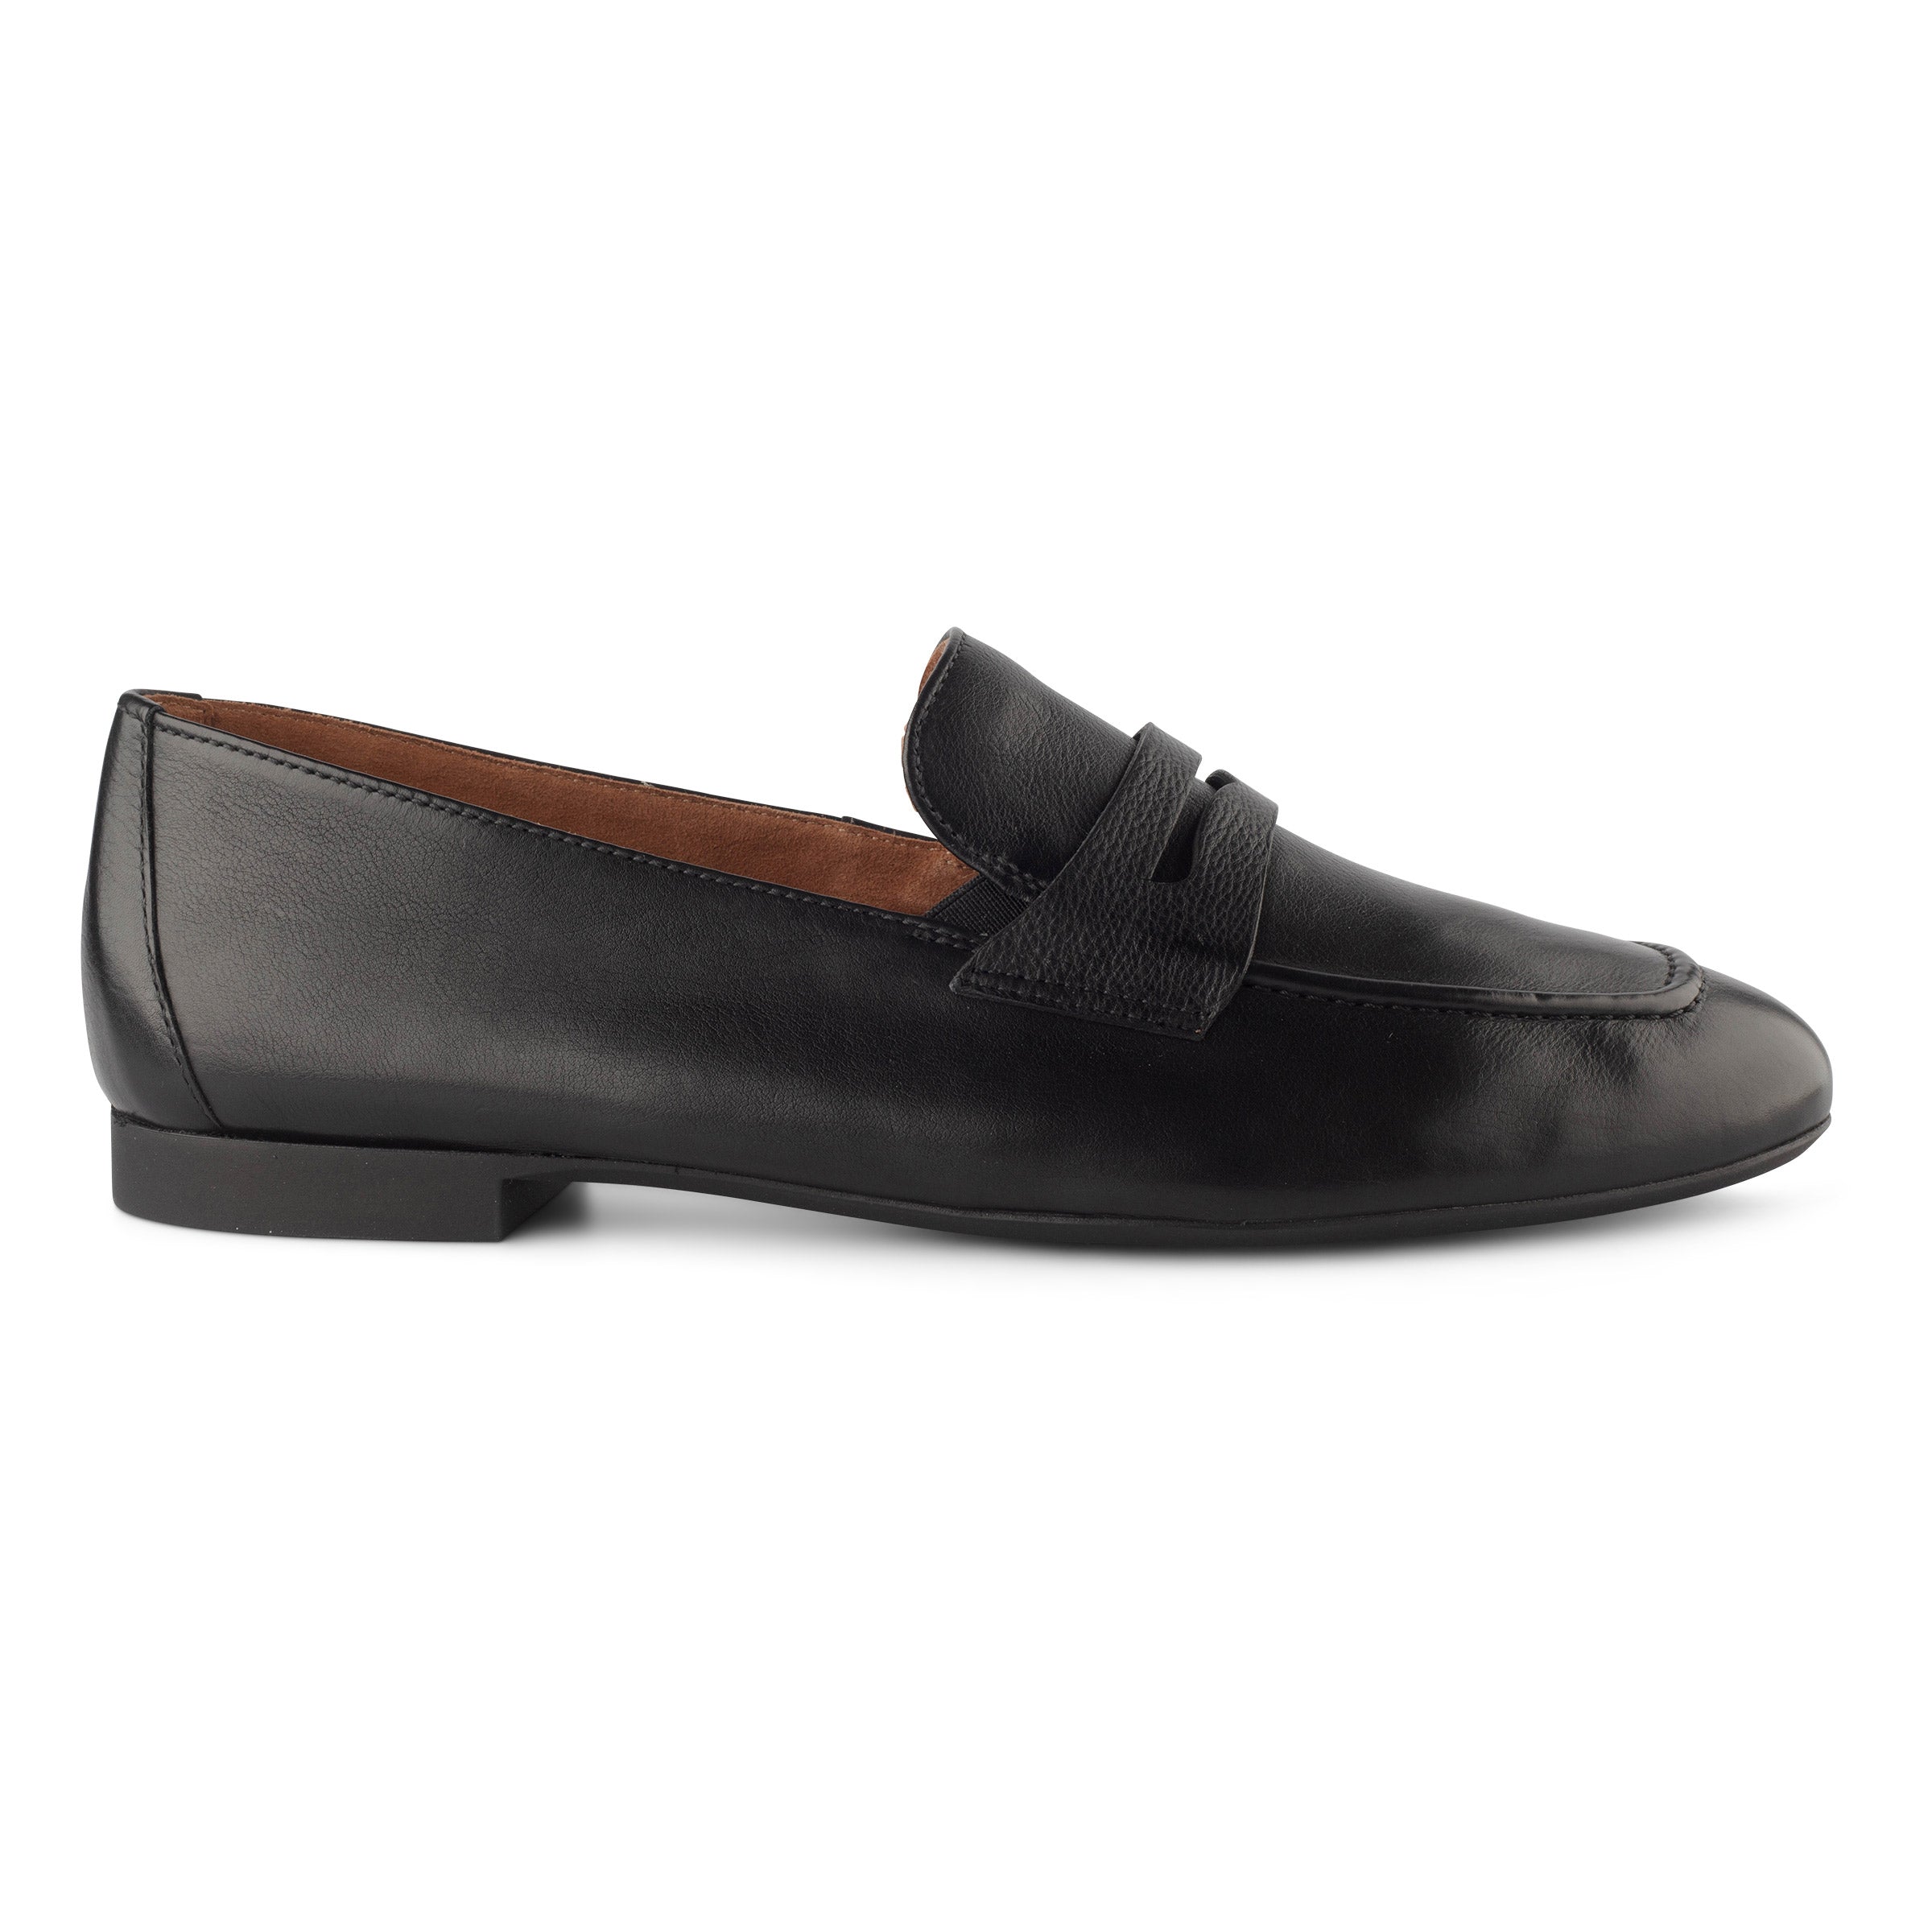 Women's Natalie Flats - Penny Loafer Shoes & Paul Green Shoes